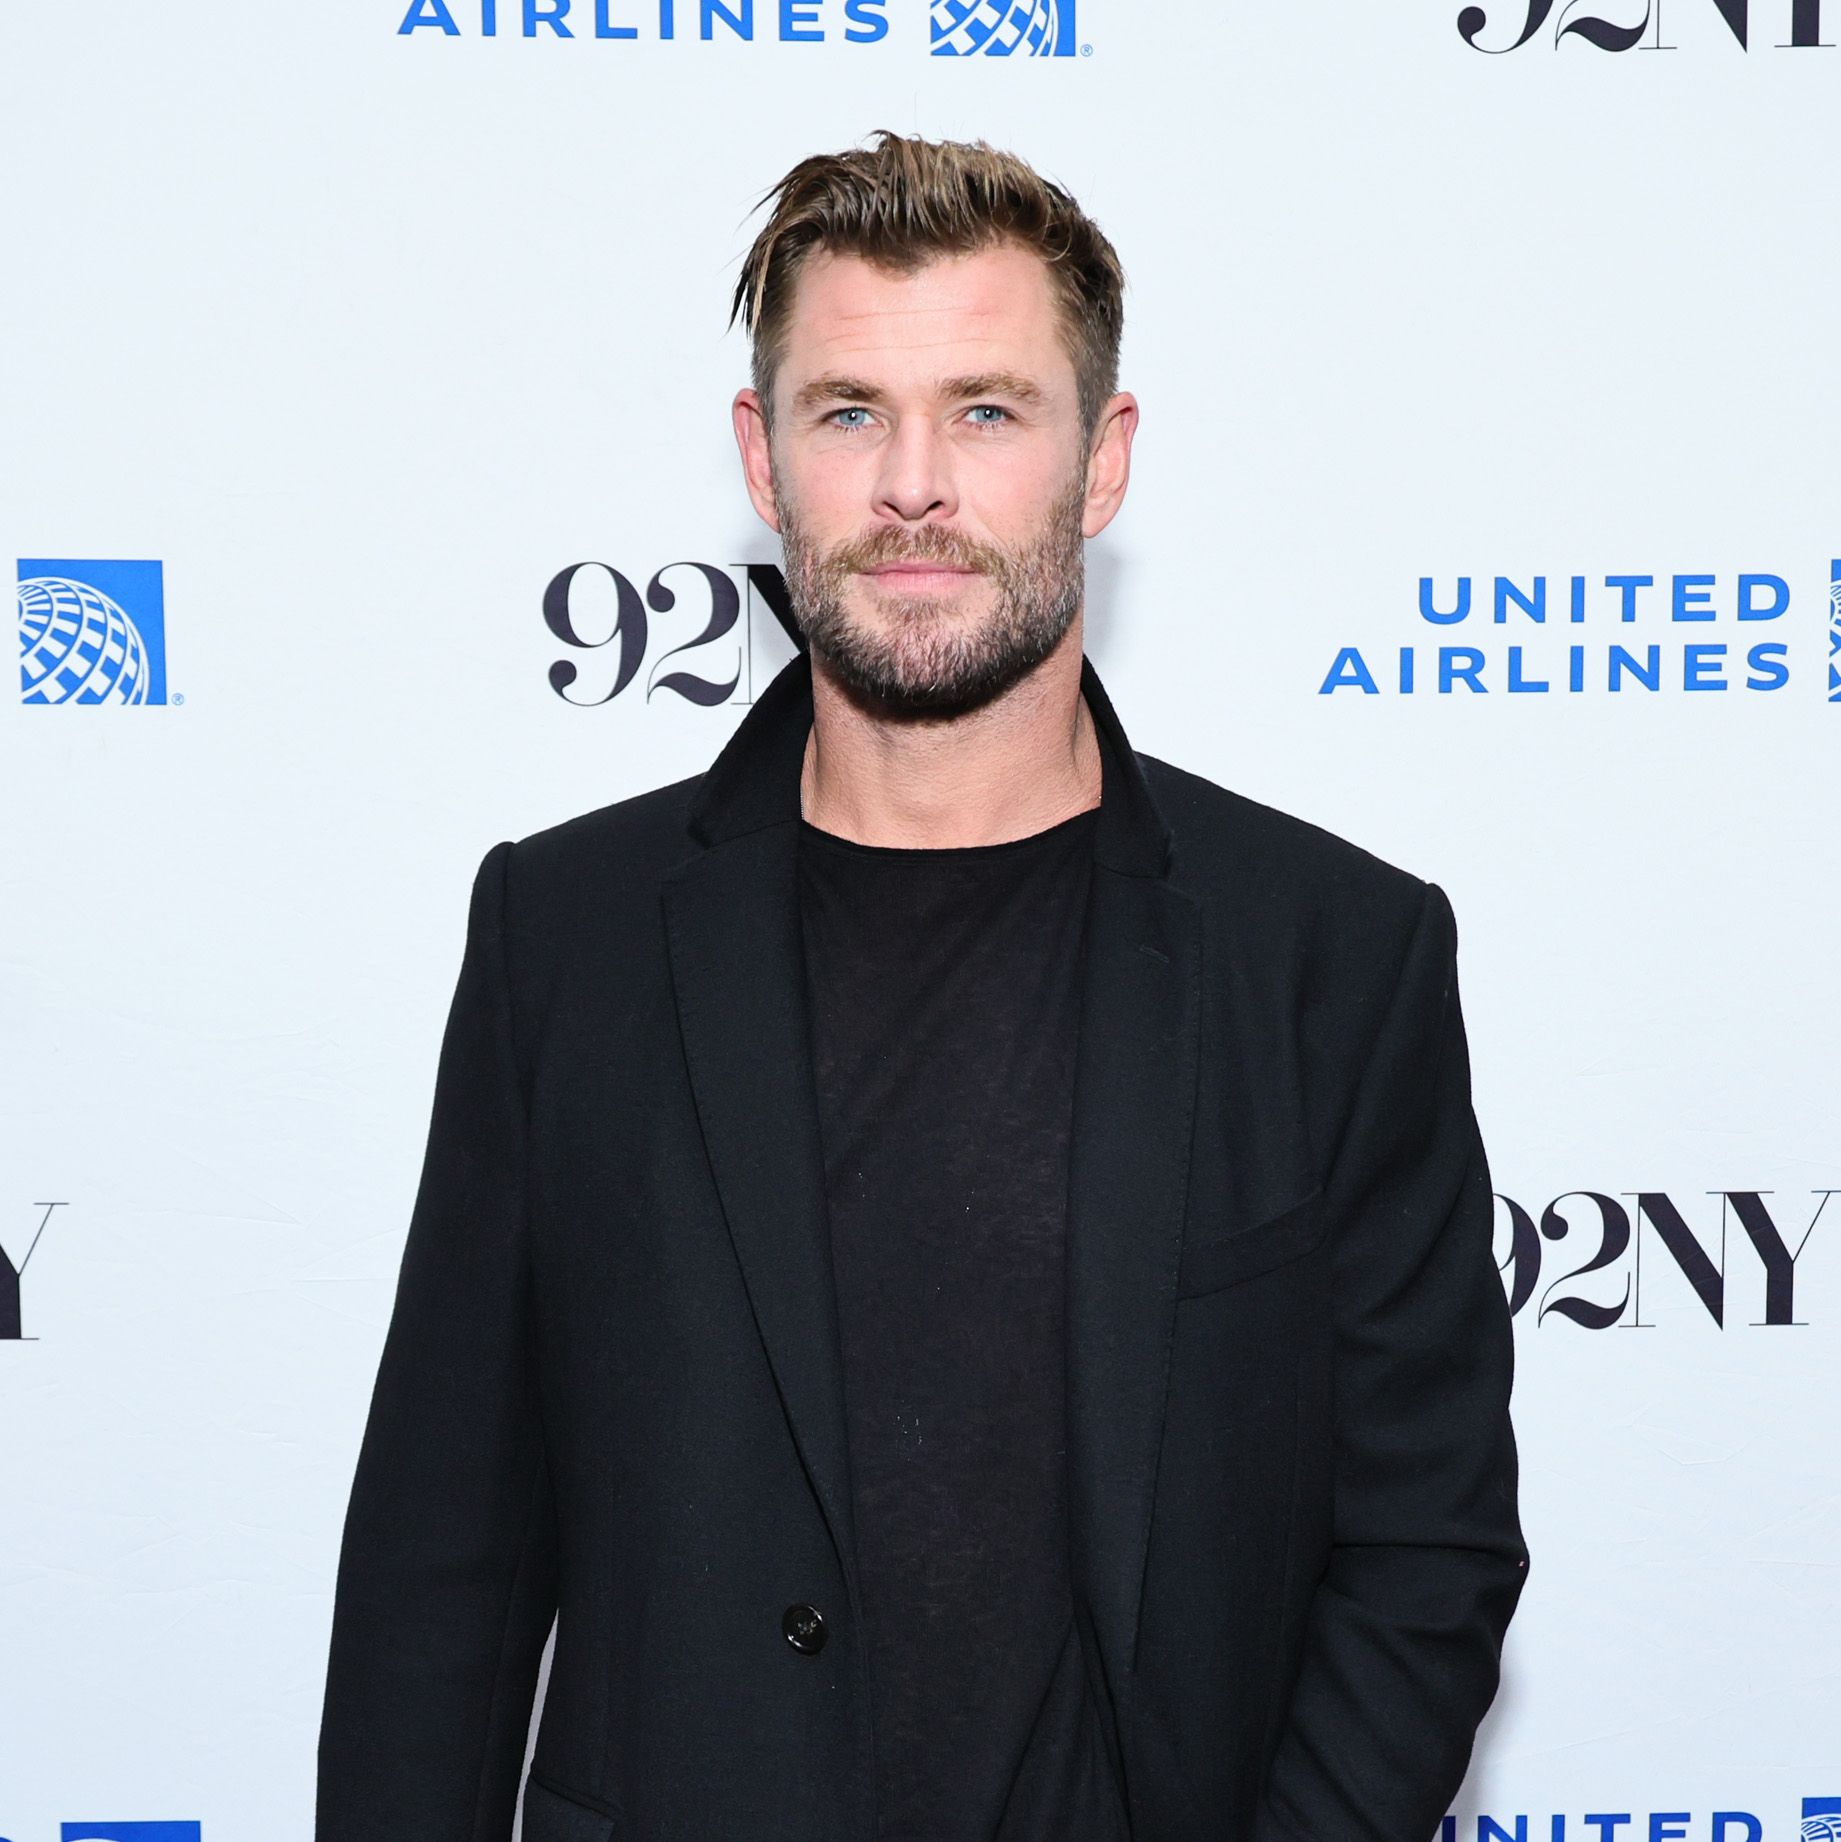 Chris Hemsworth Is Taking Time Off Acting Following Scary Health News